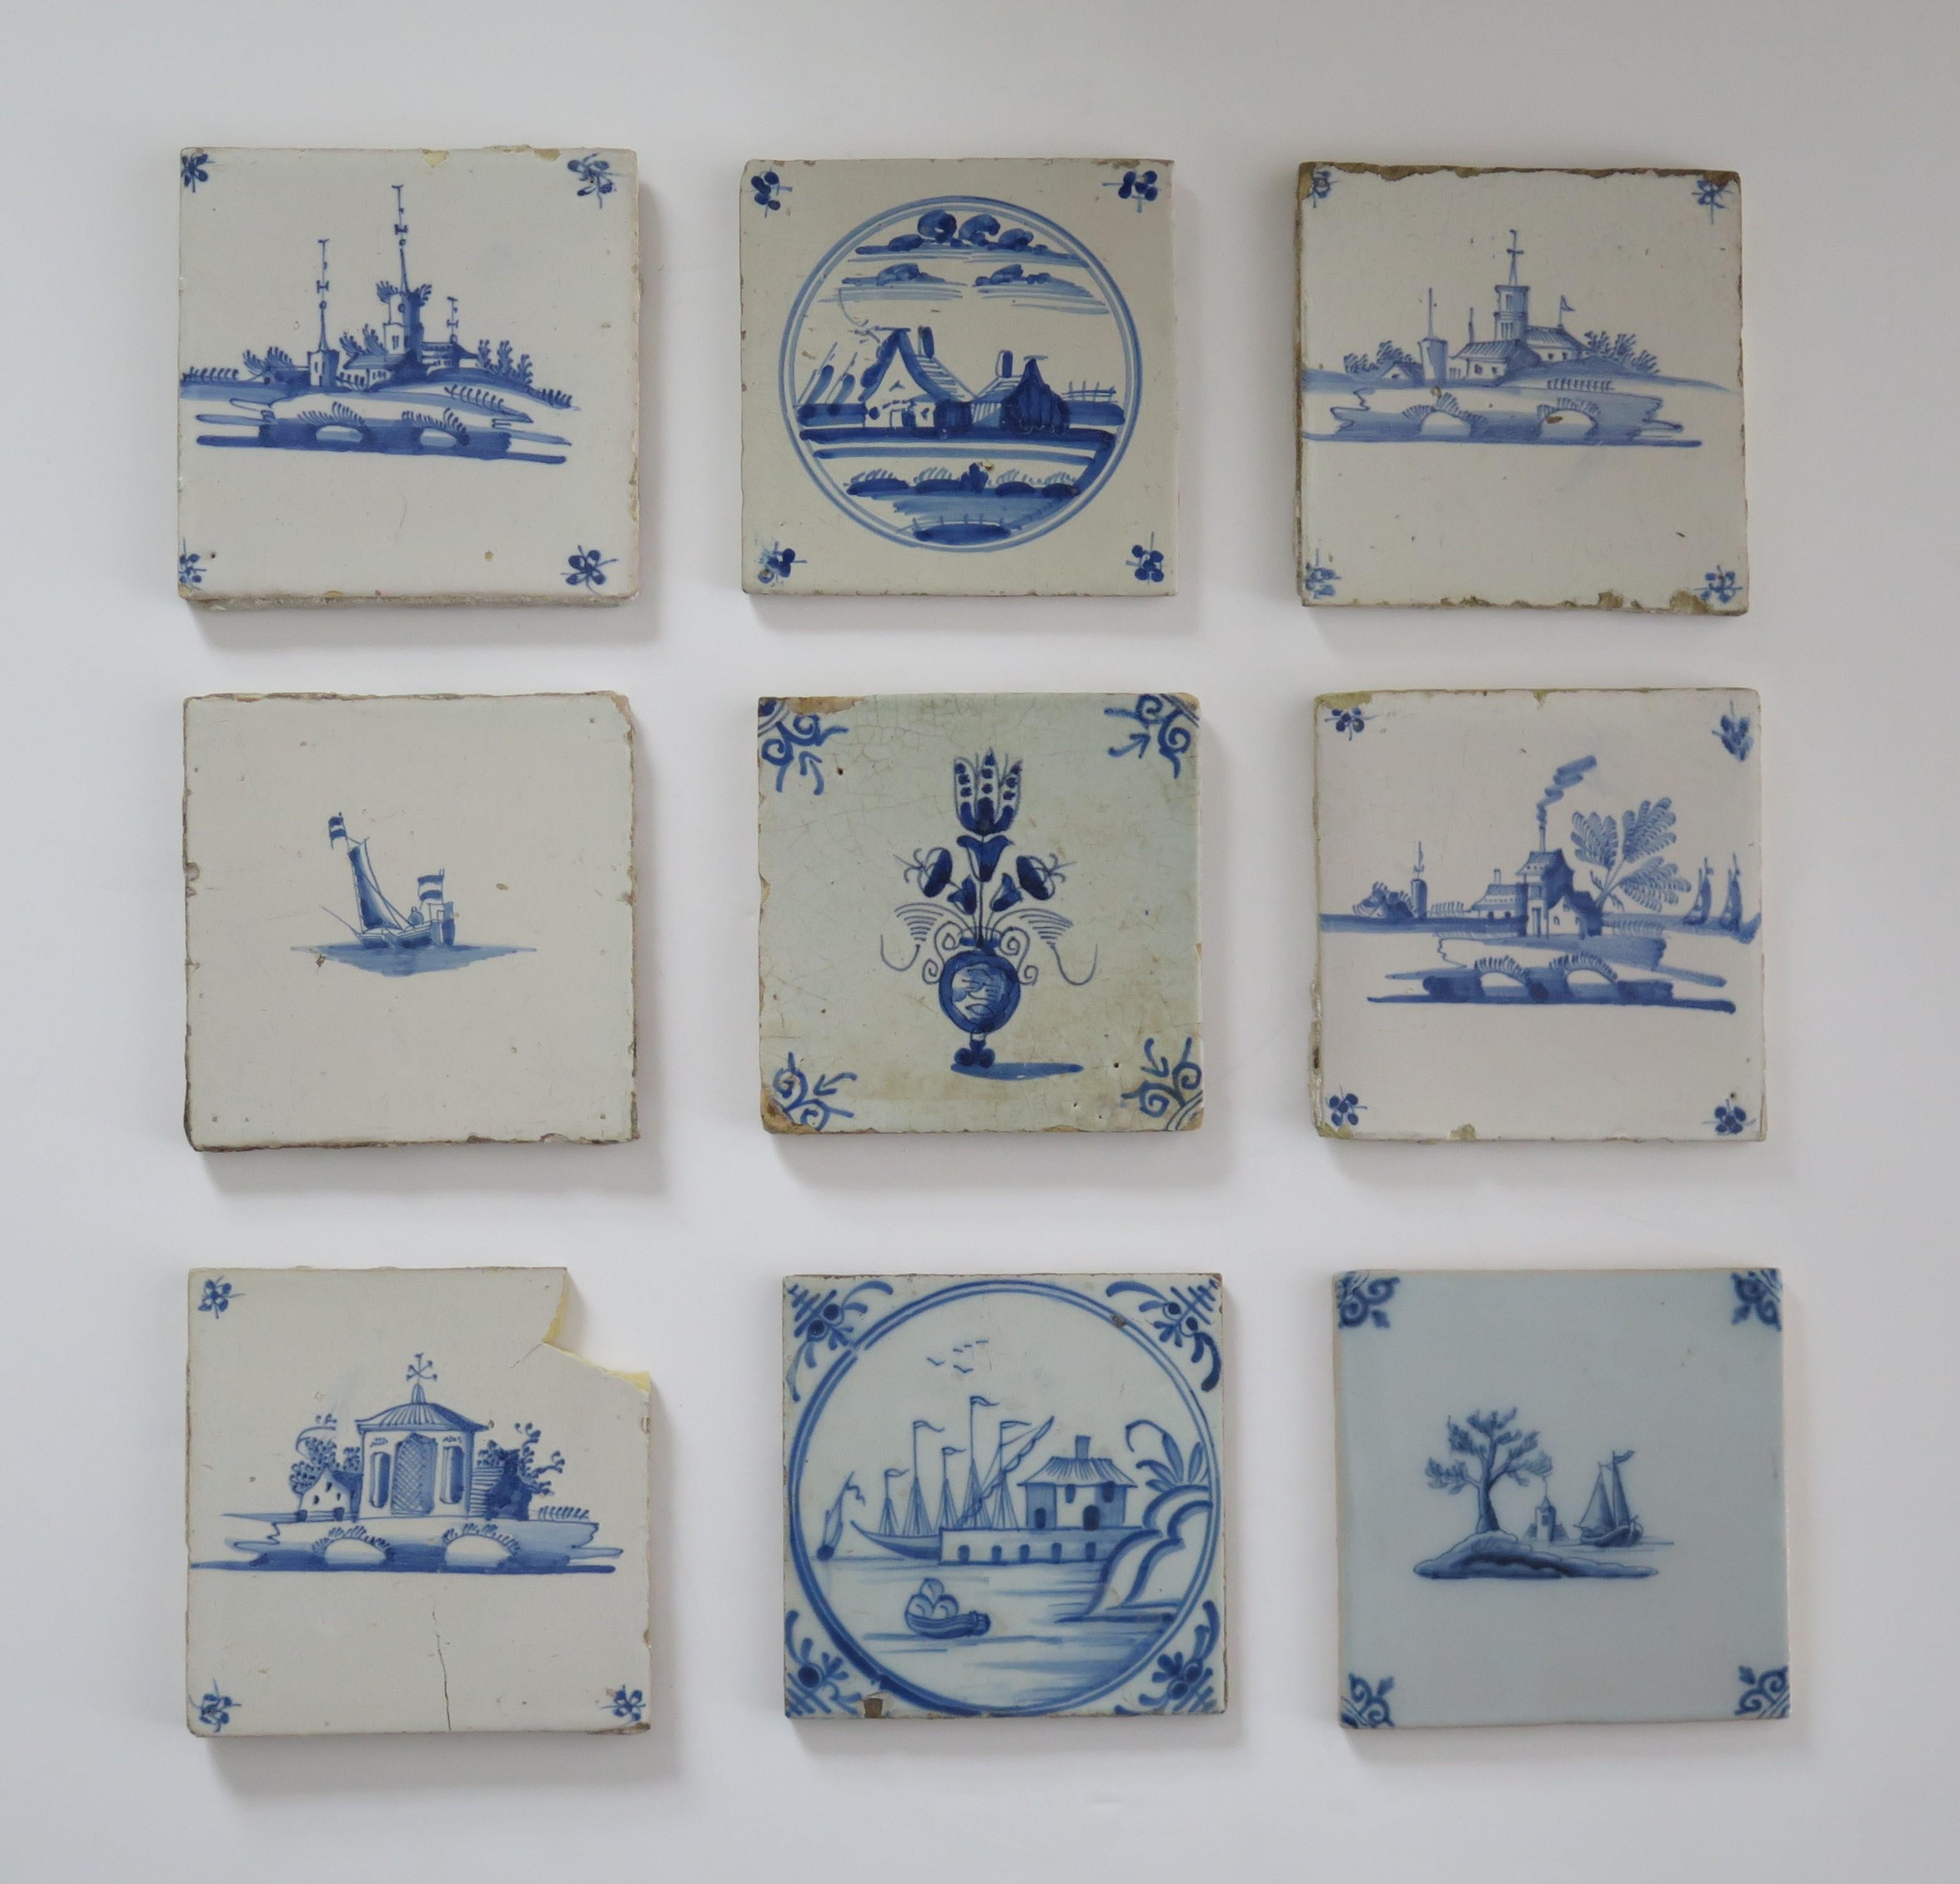 These are NINE Delft ceramic wall tiles, all with different blue and white hand painted patterns, made in the Netherlands, from the 19th Century to the 17th Century, but mainly 18th Century.

Each tile is nominally slightly over 5 inches